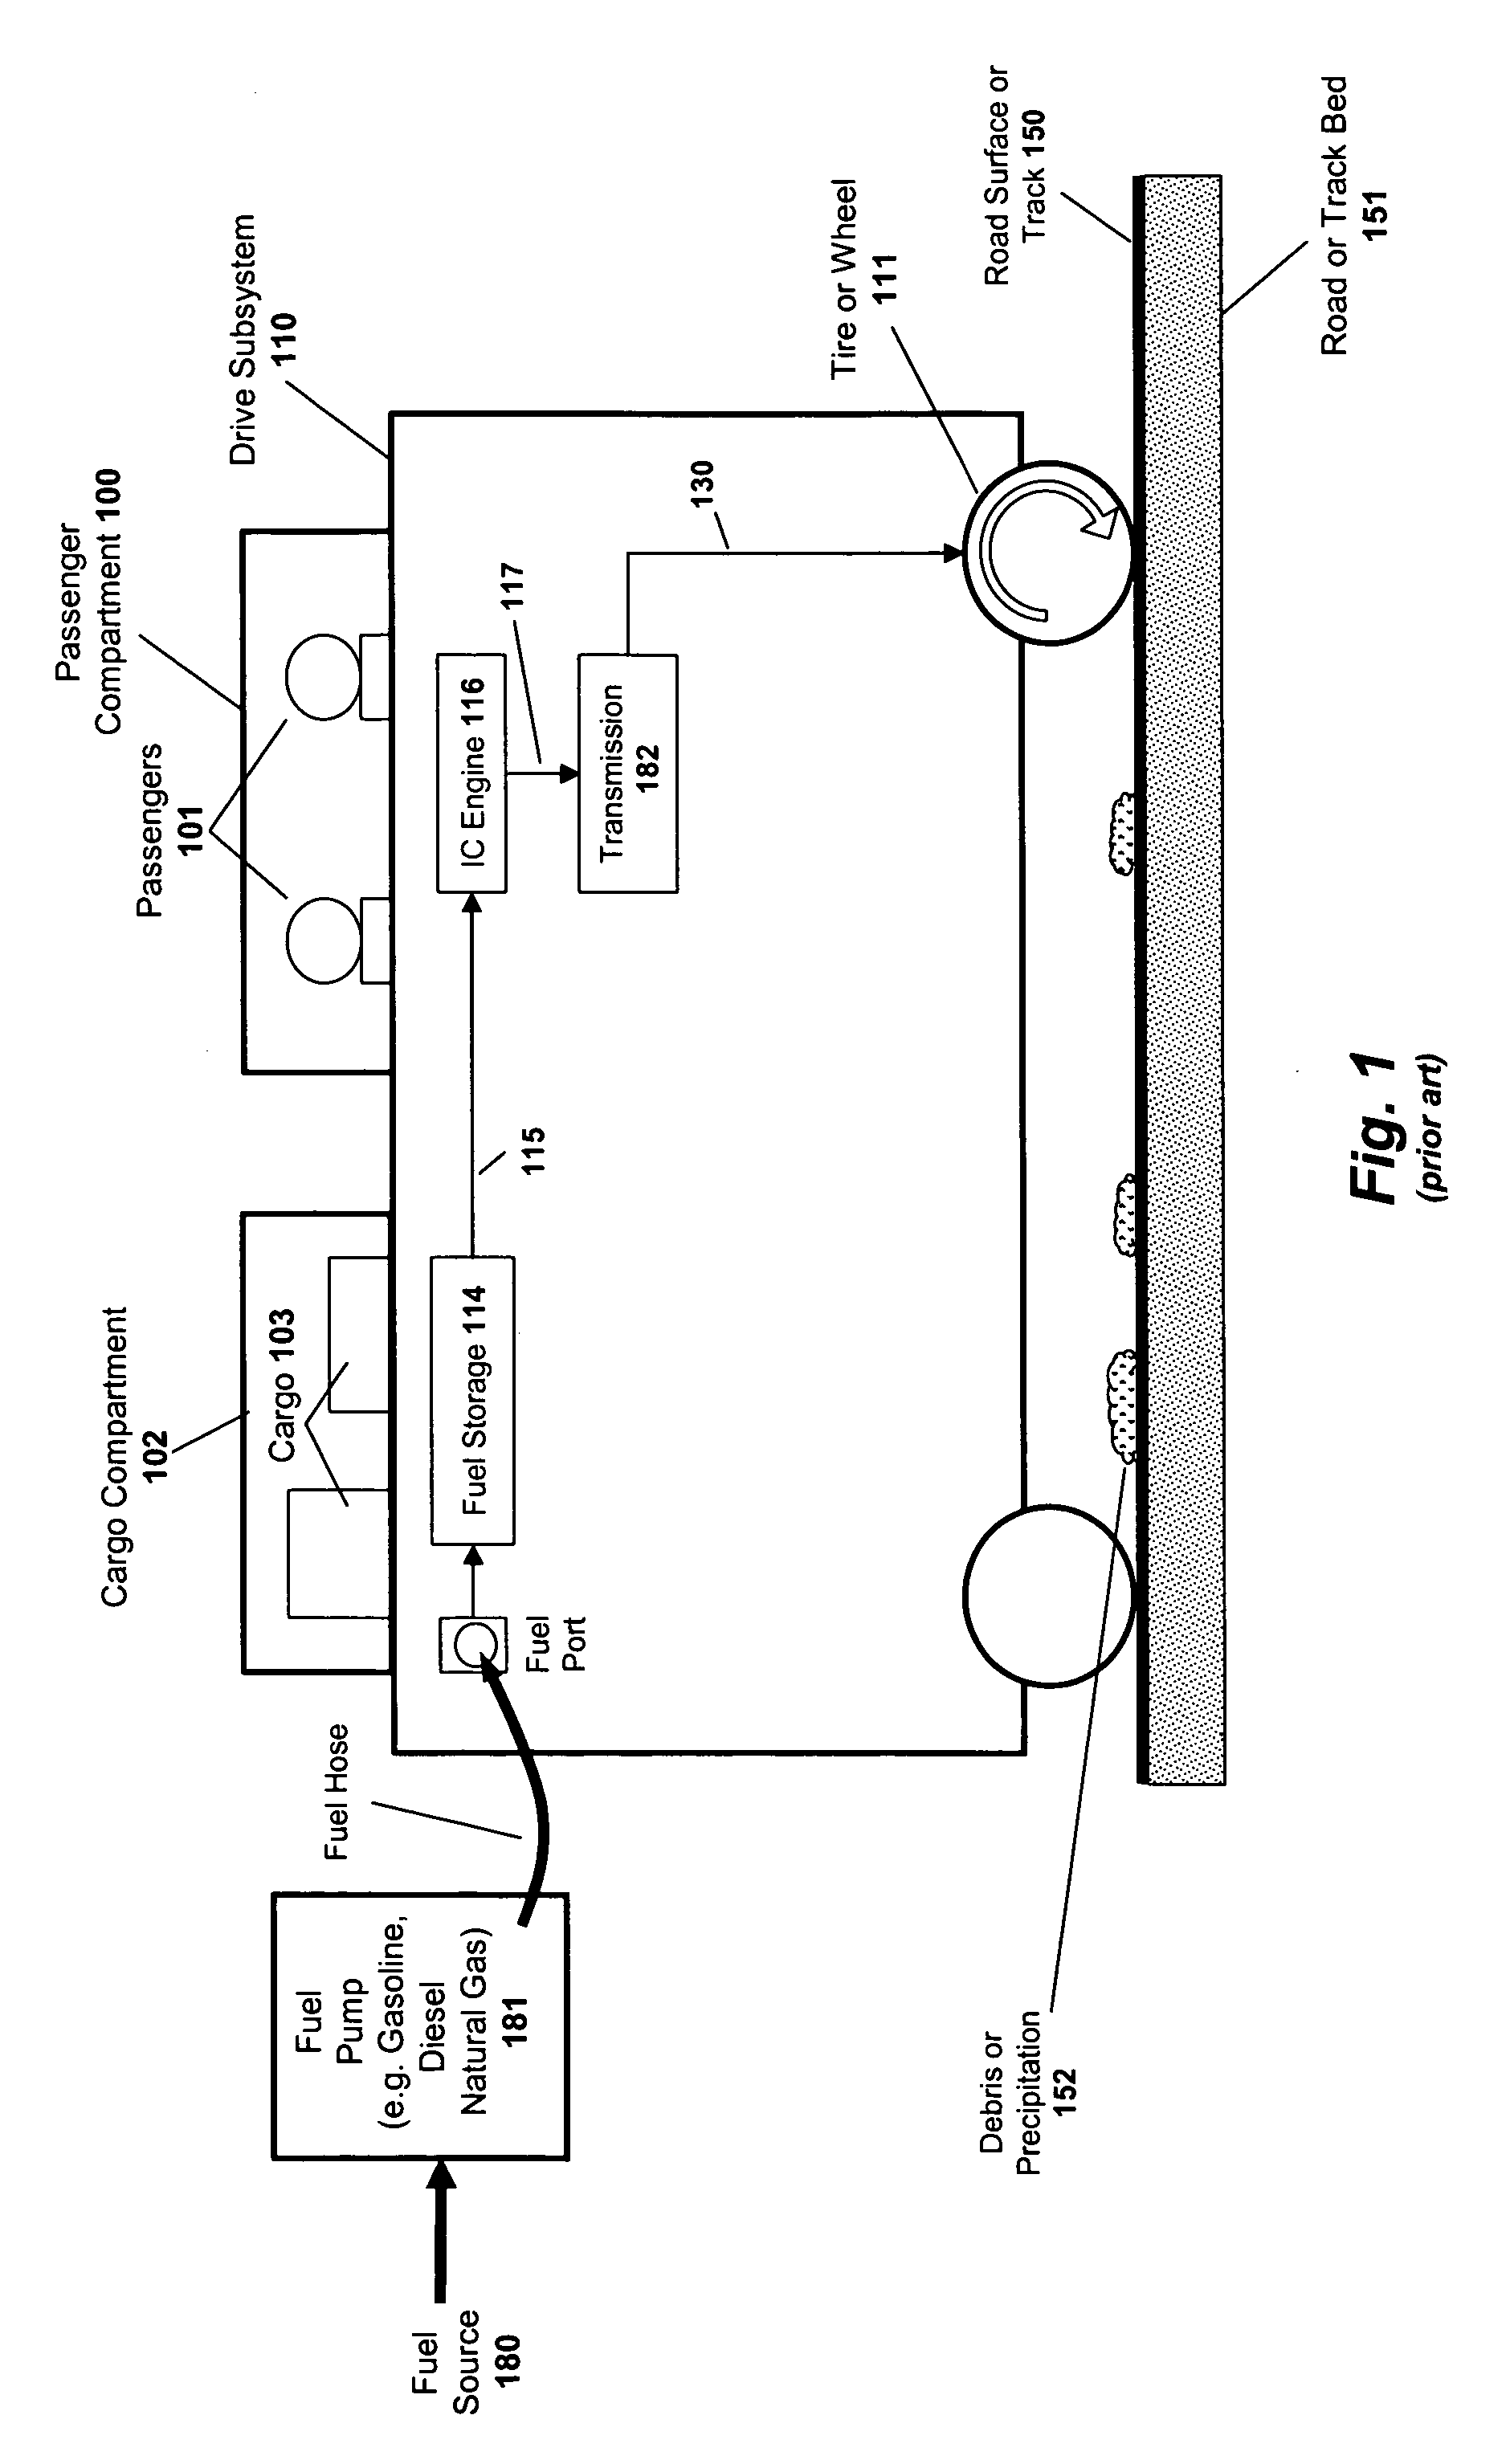 System and method for powering vehicle using radio frequency signals and feedback